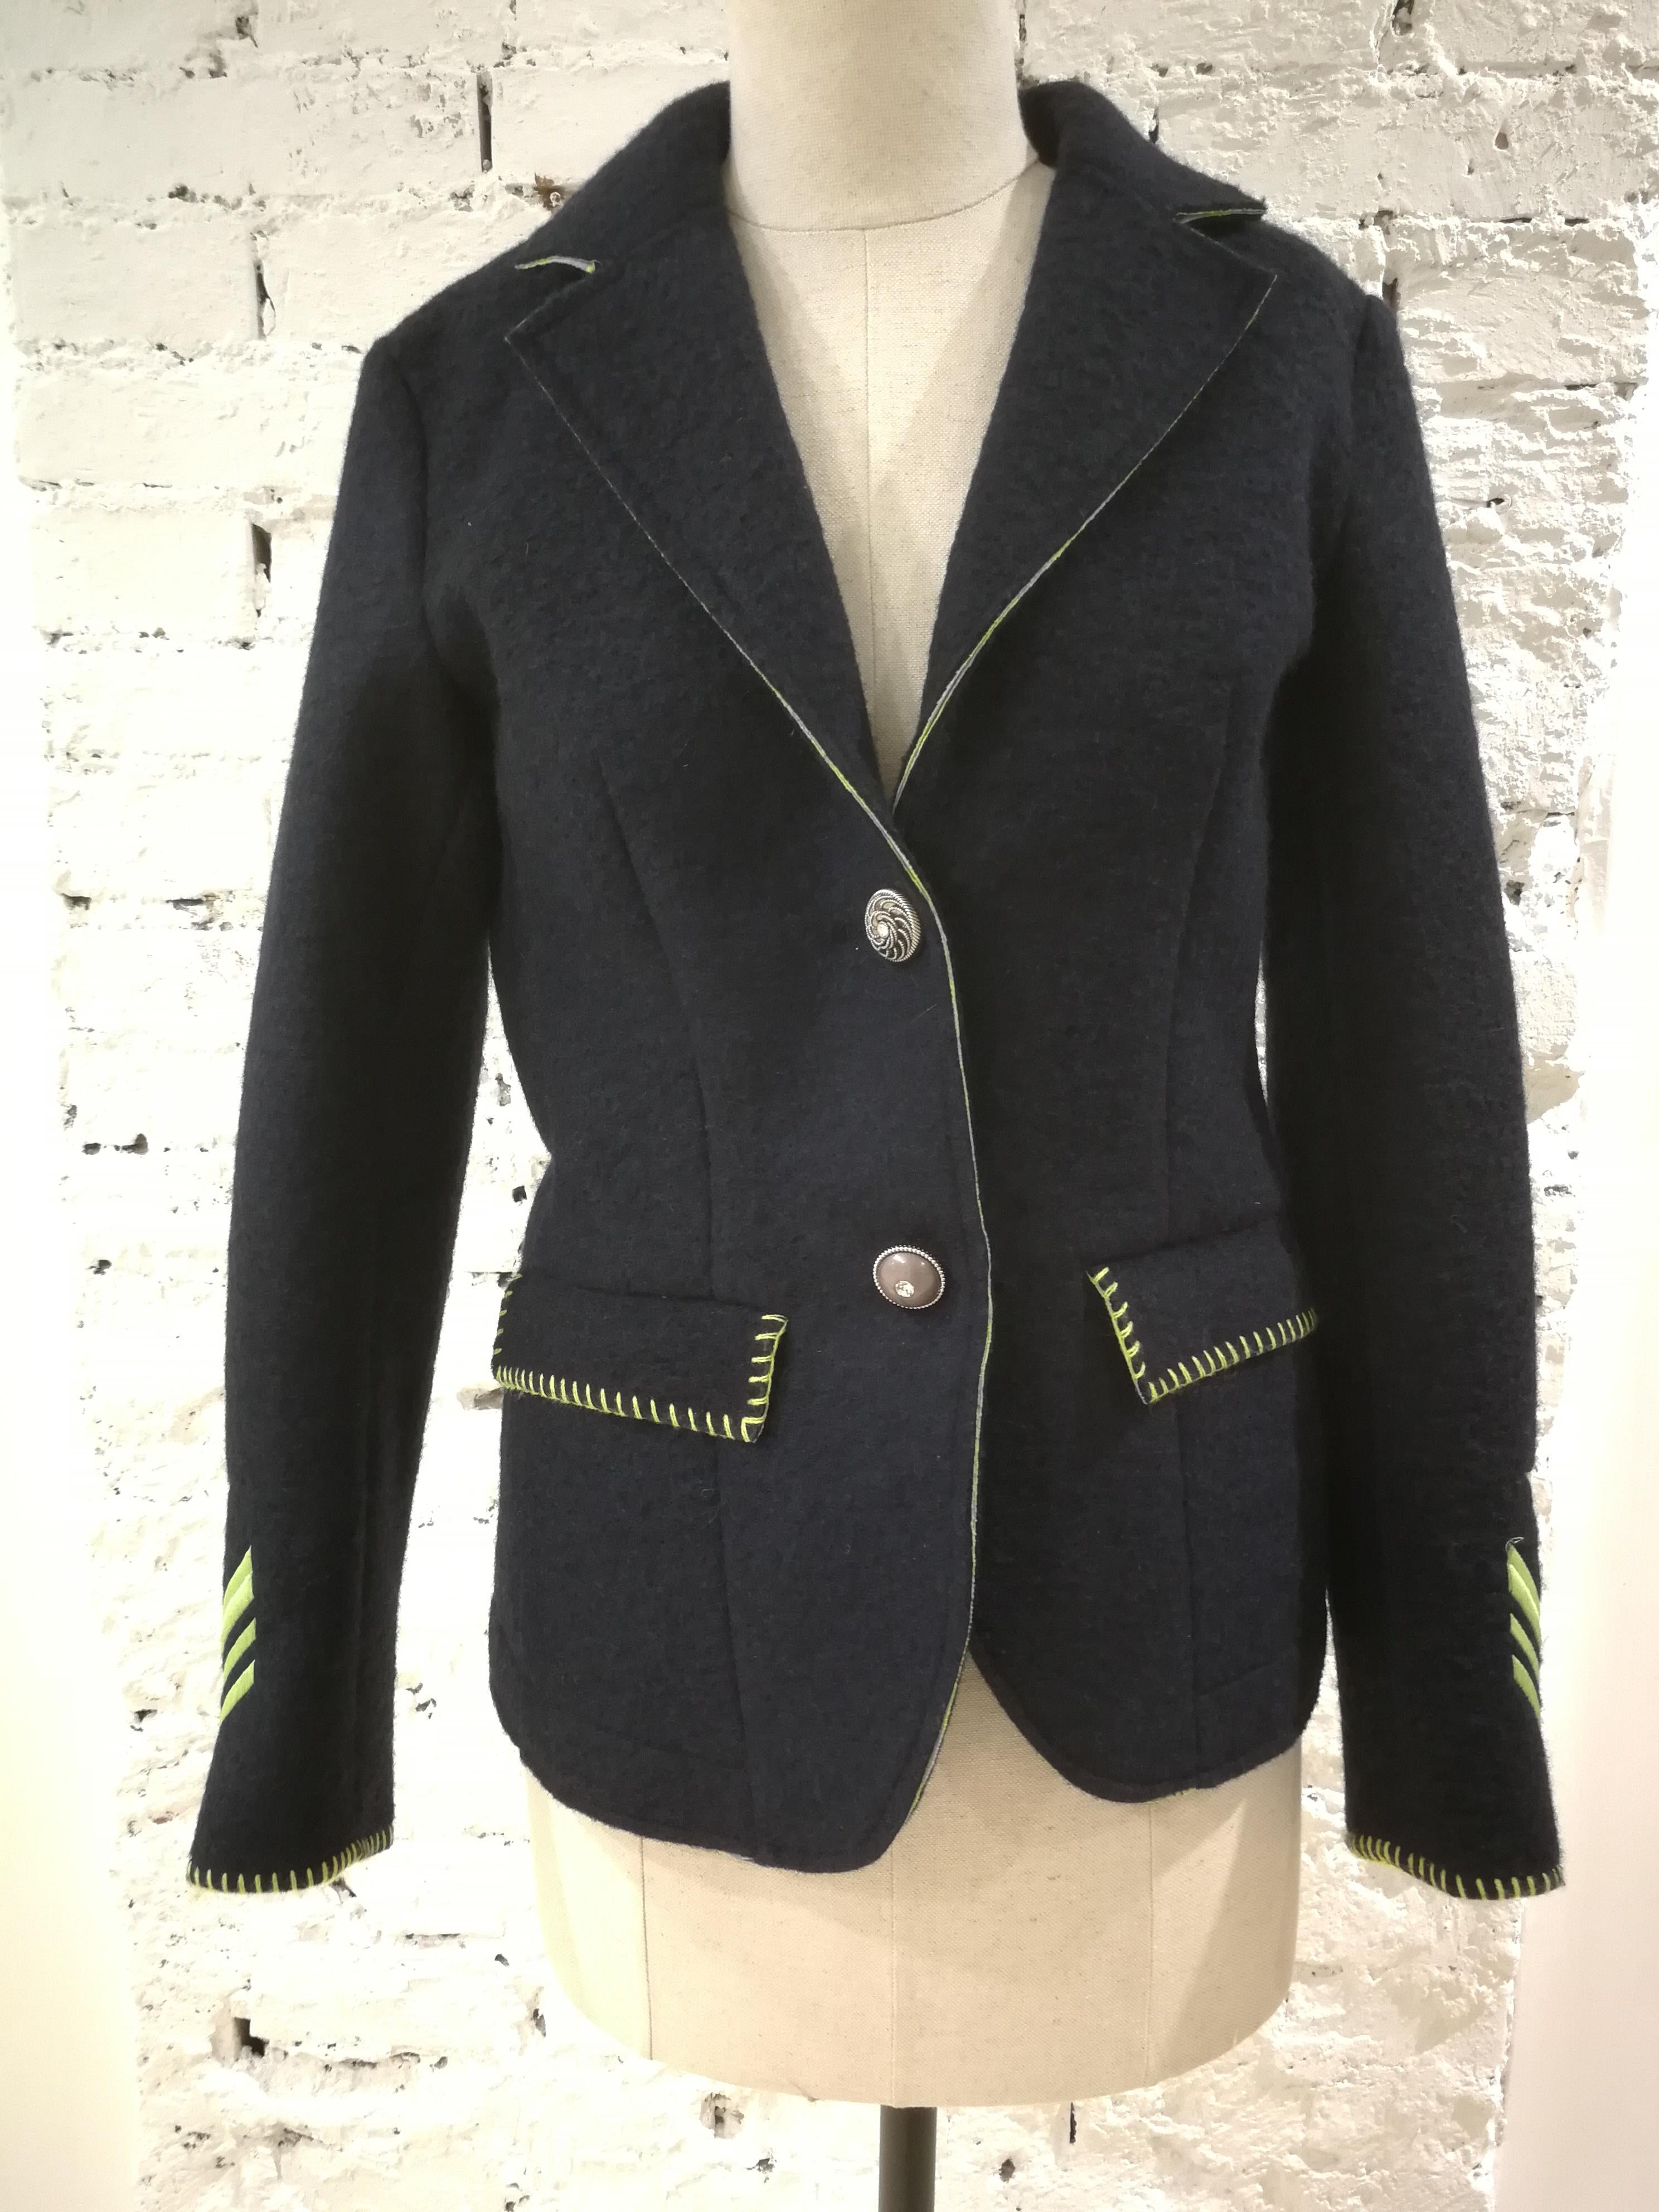 De'Hart Blue Wool Jacket

Blue wool jacket with fluo green patterns on both hems
Totally made in italy in size 44